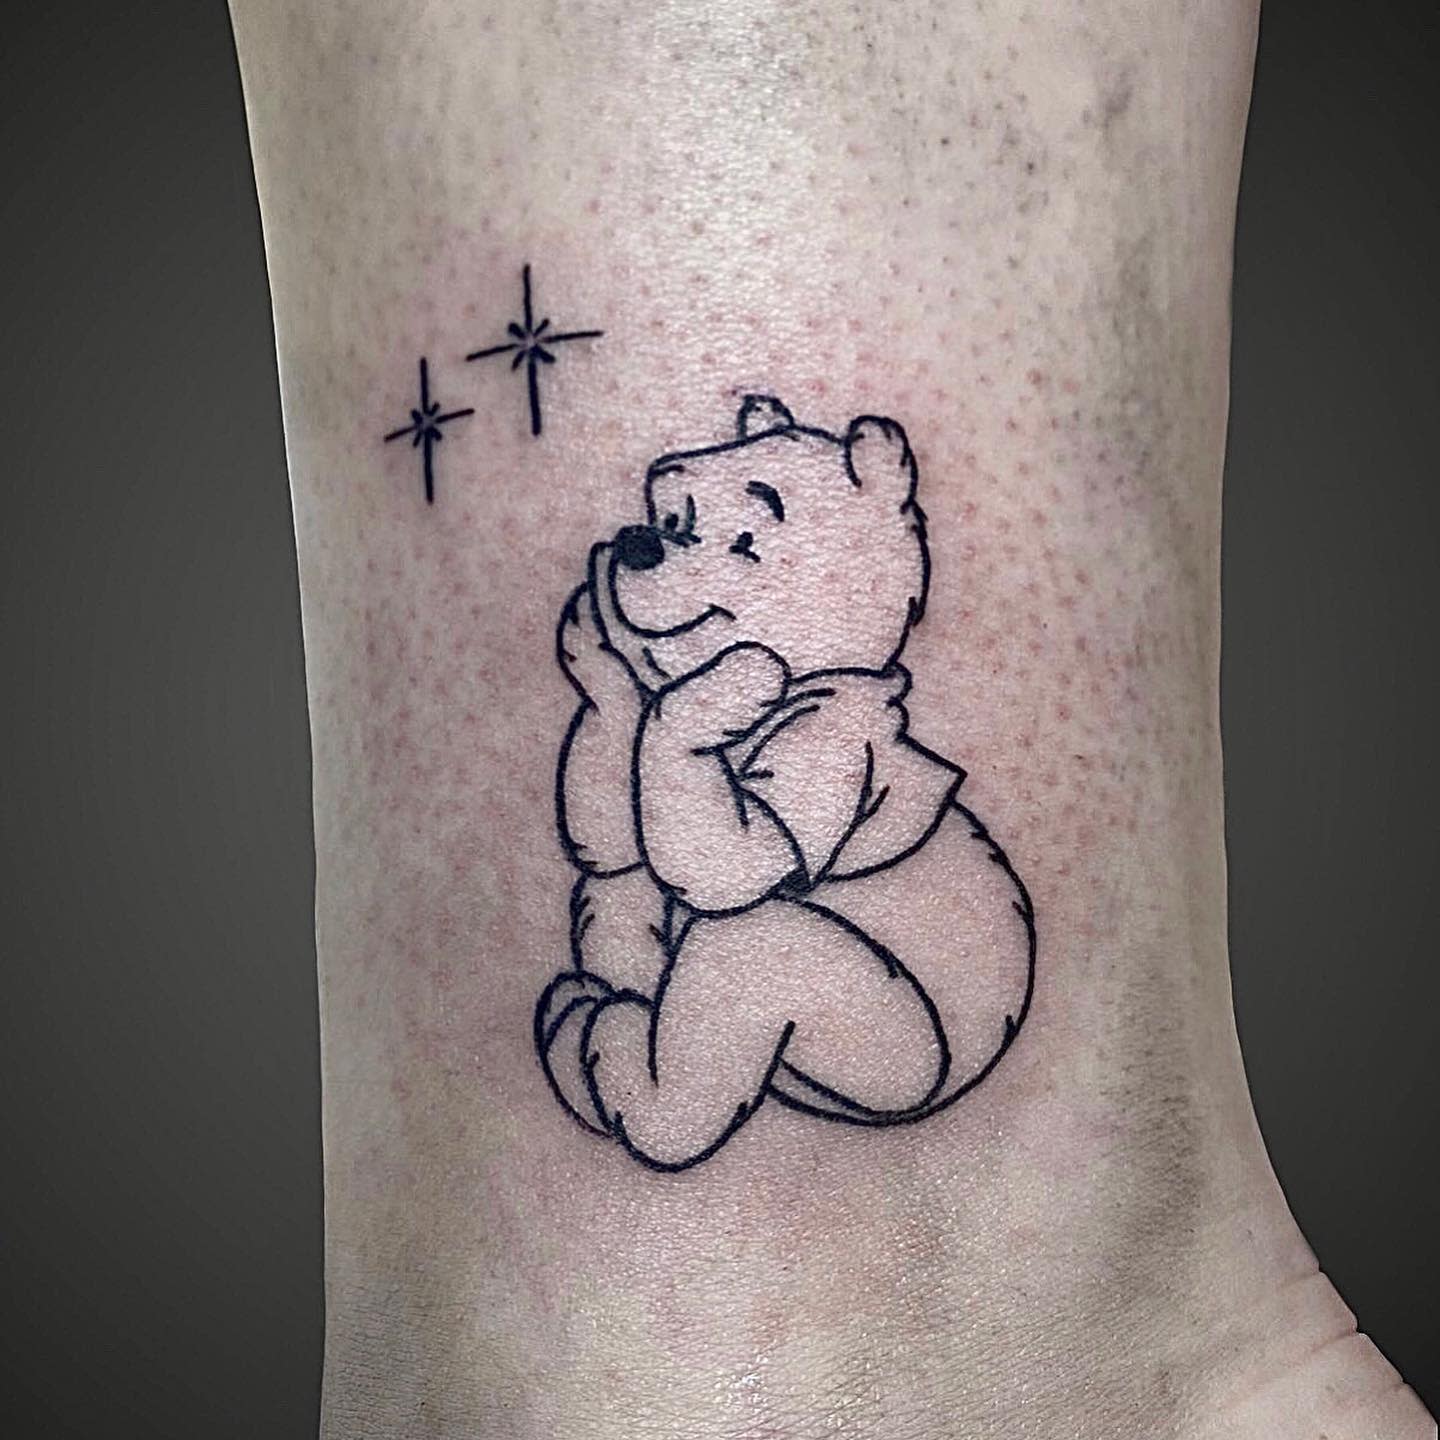 Top 58 Winnie The Pooh Tattoo Ideas - [2021 Inspiration Guide]